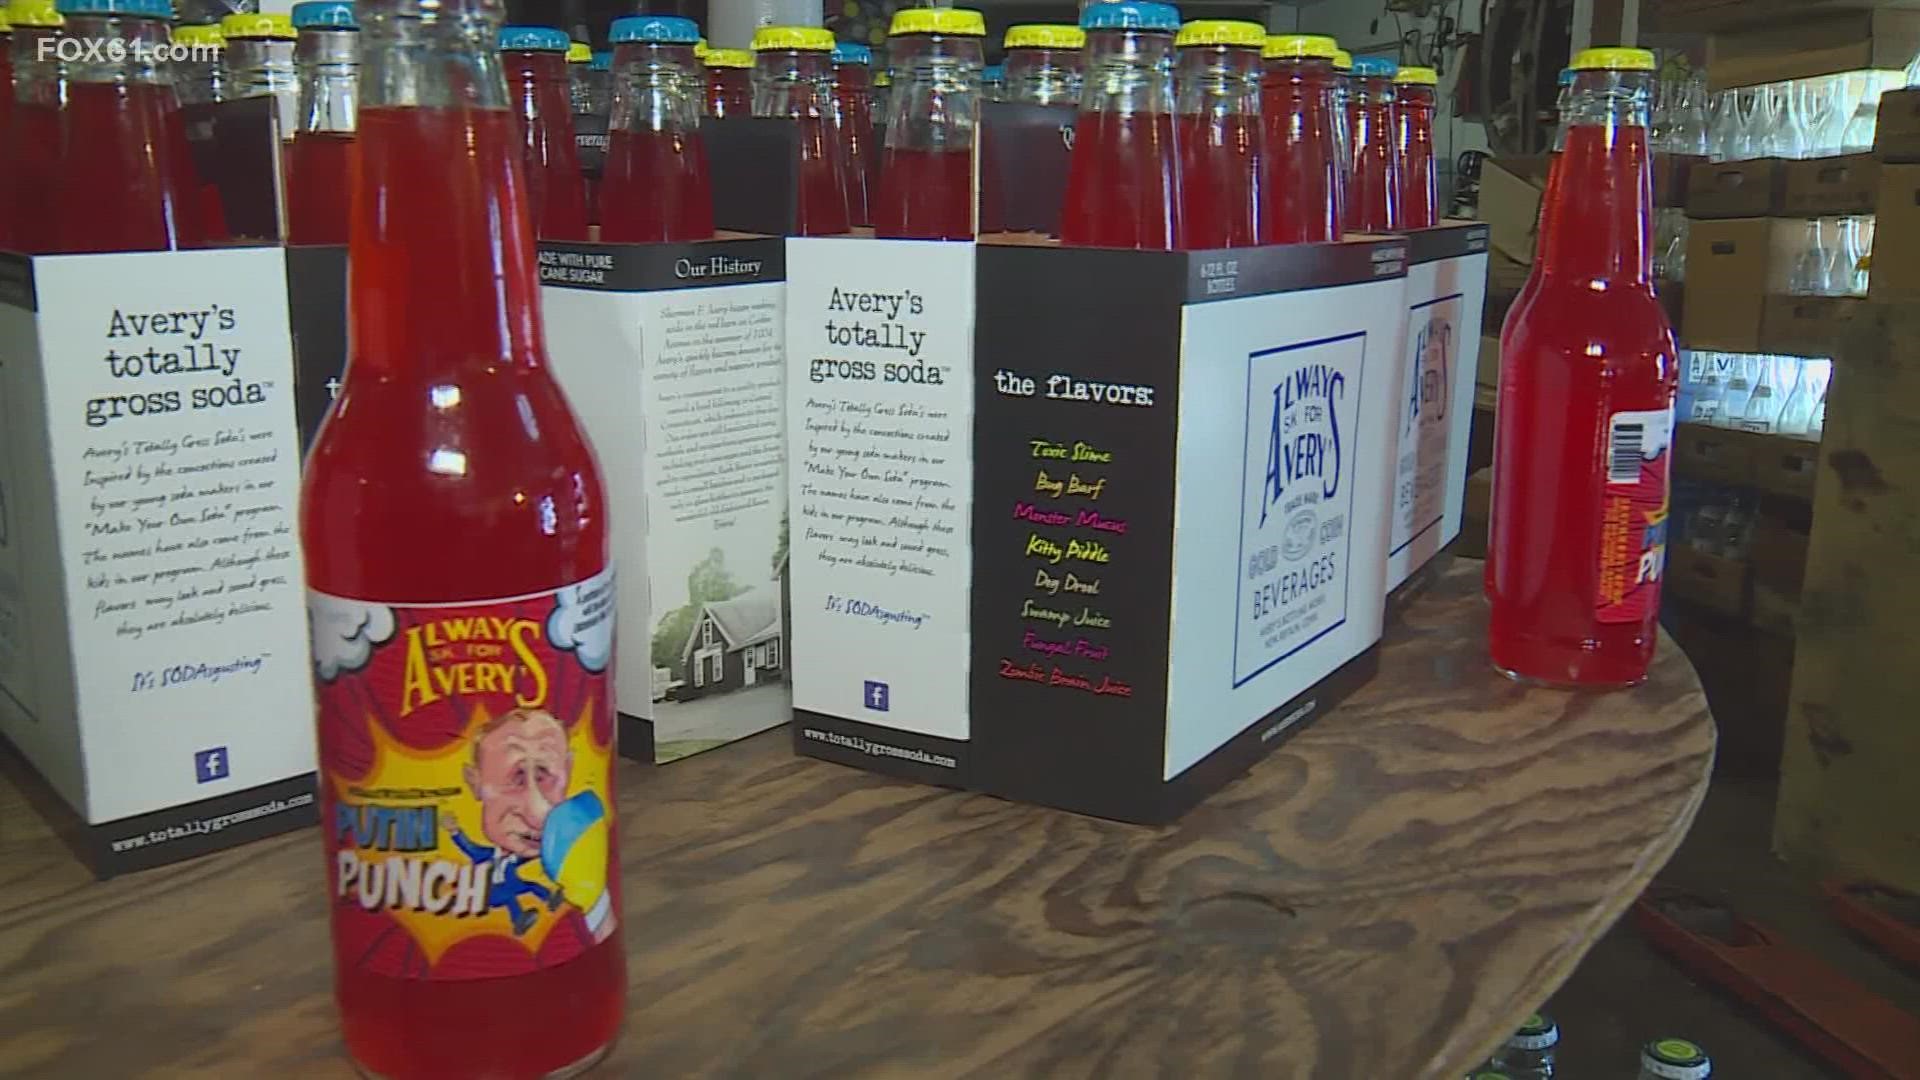 Some of the proceeds they receive in the purchase of their soda will go to support Ukraine